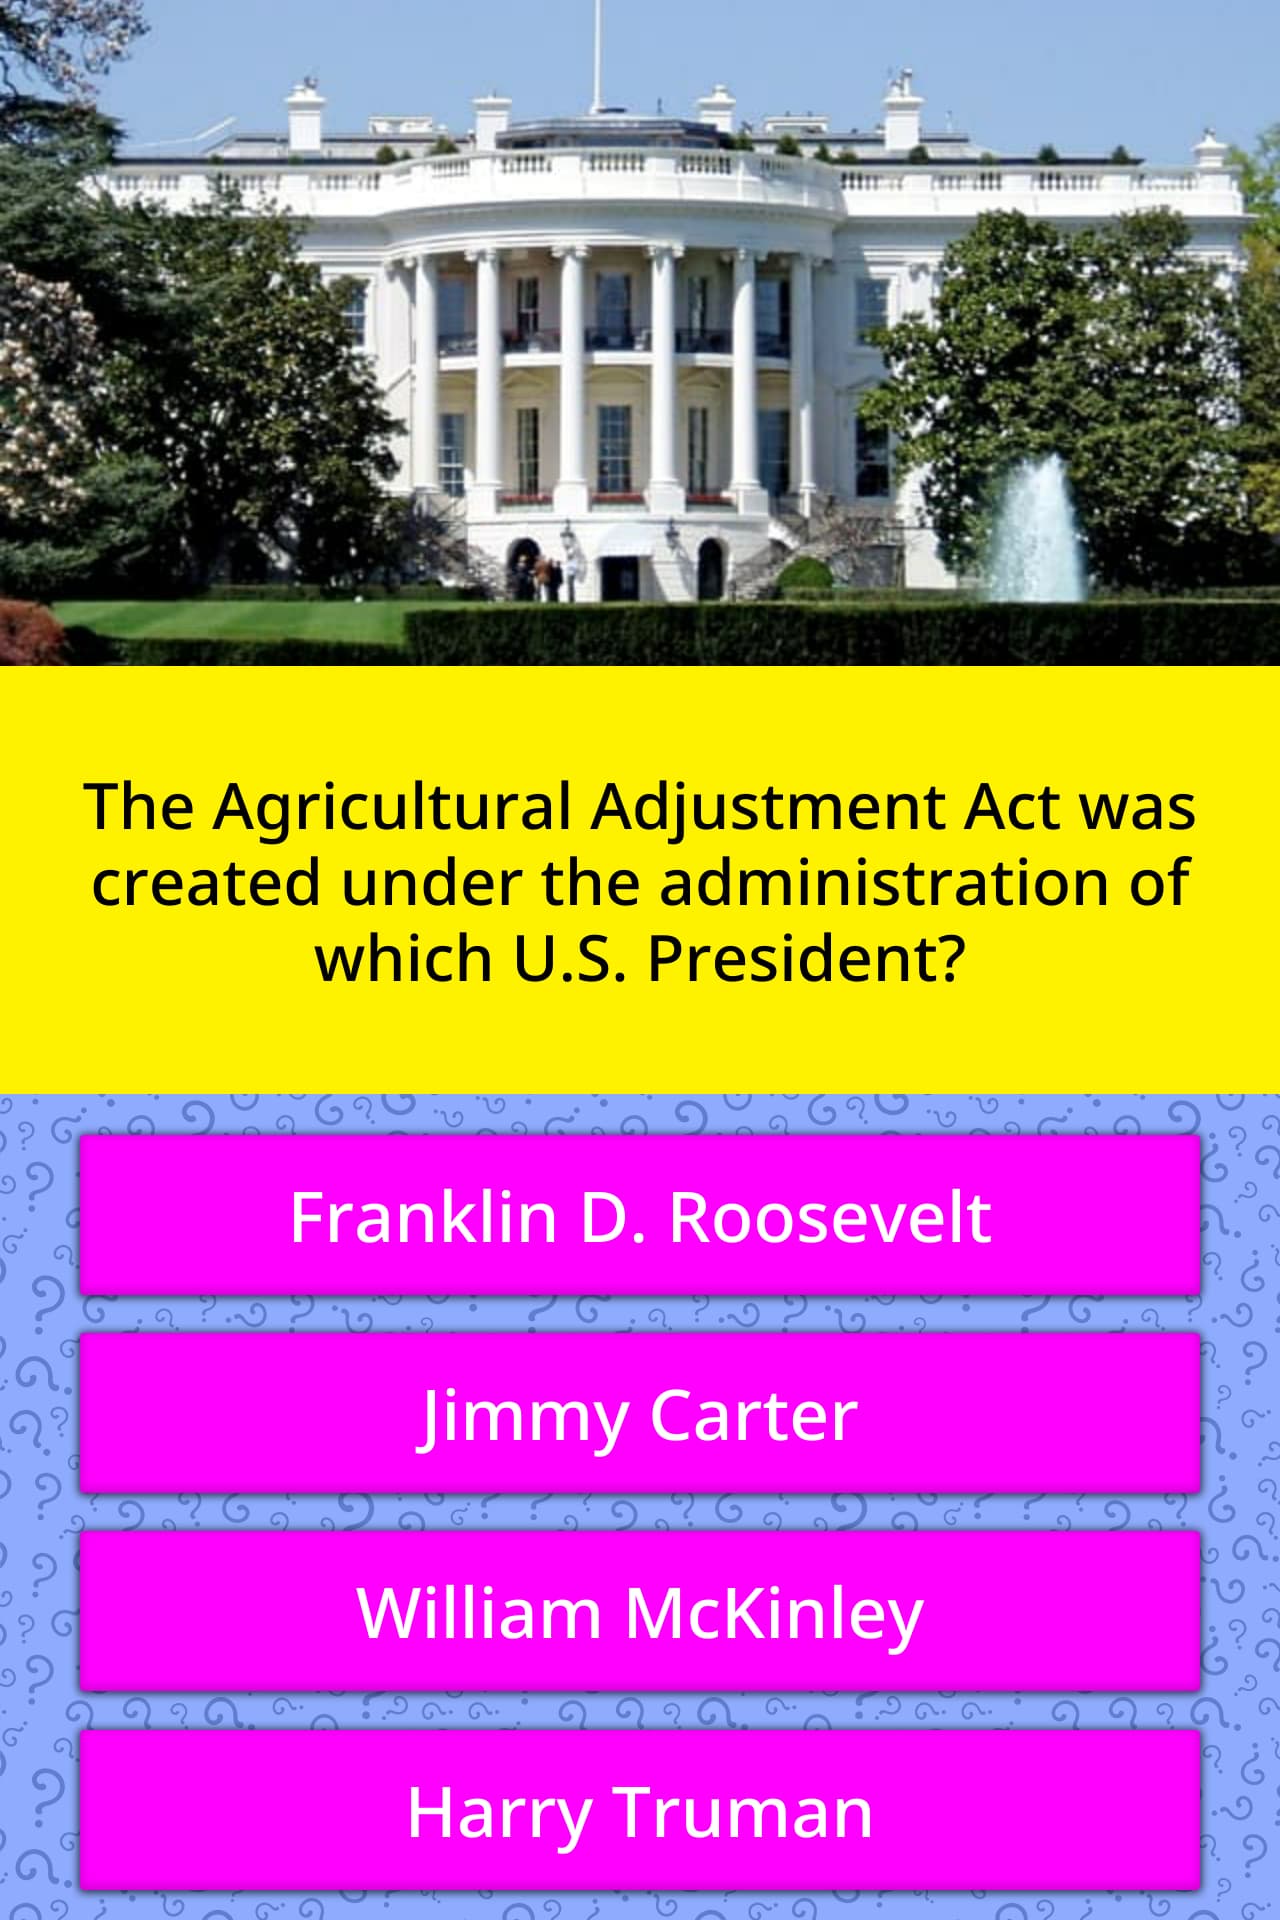 The Agricultural Adjustment Act was... | Trivia Questions | QuizzClub